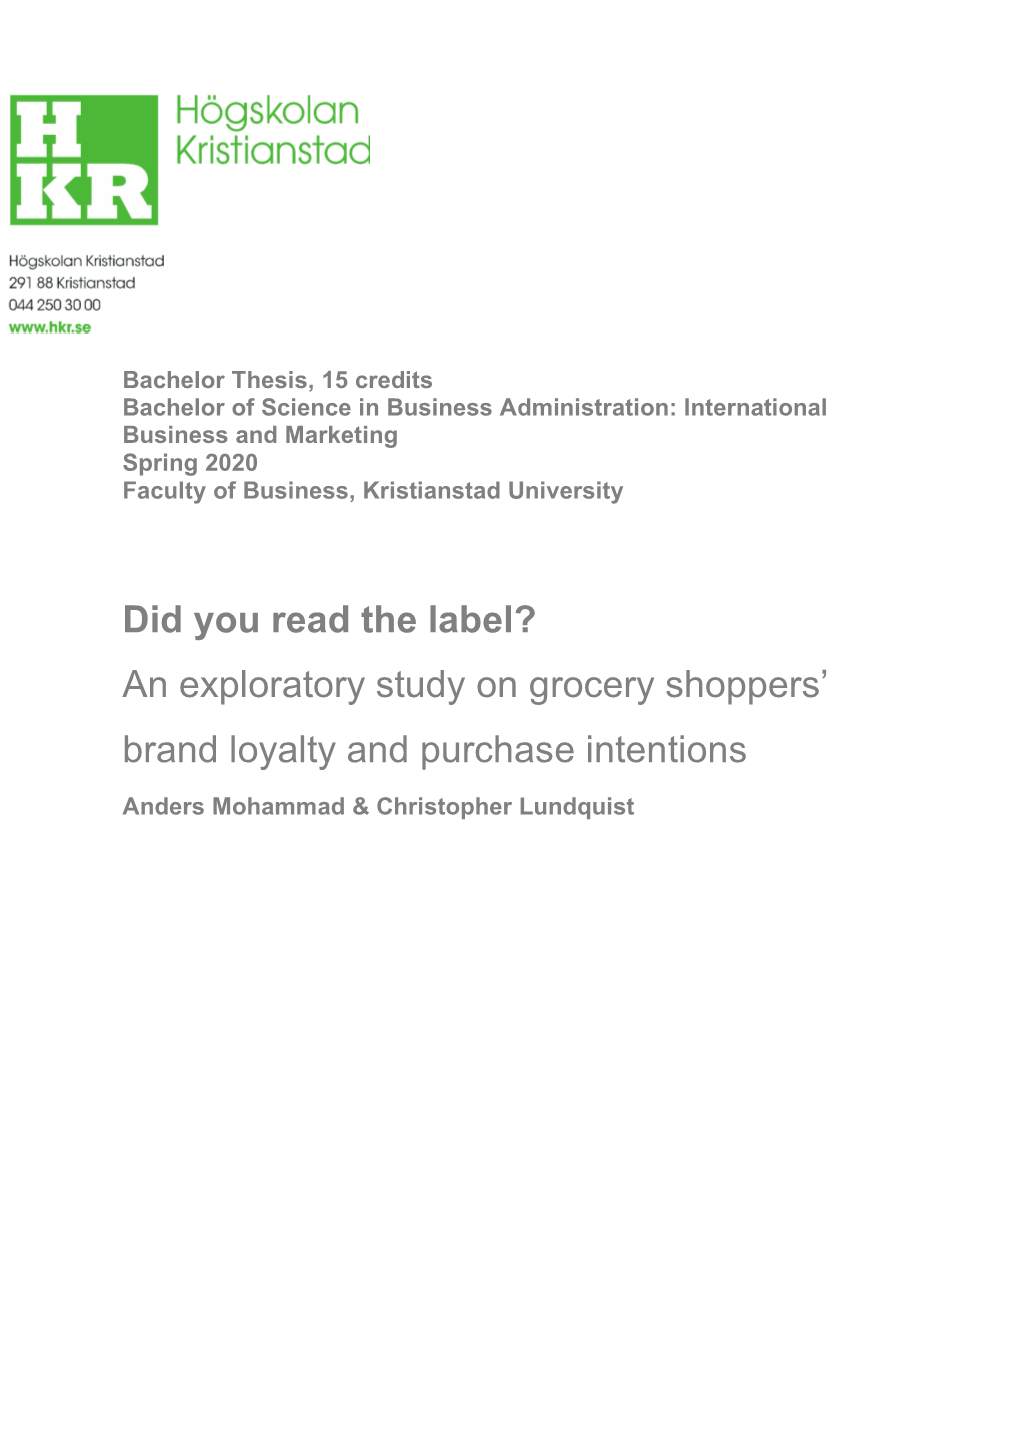 An Exploratory Study on Grocery Shoppers' Brand Loyalty And